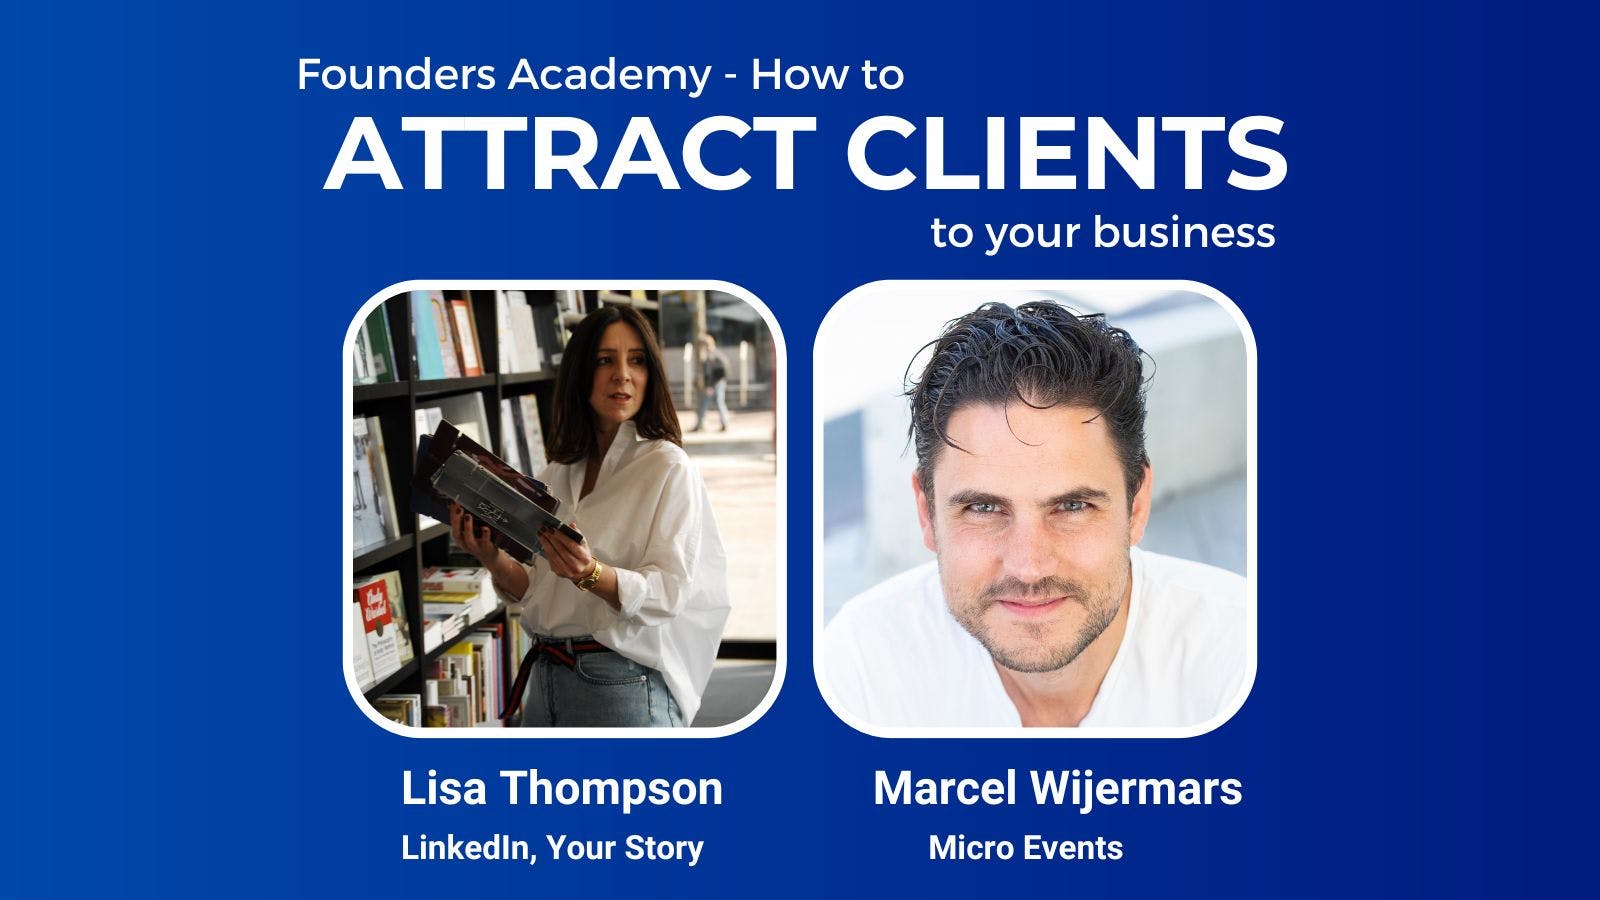 How to Attract Clients to your Business with LinkedIn & Micro Events